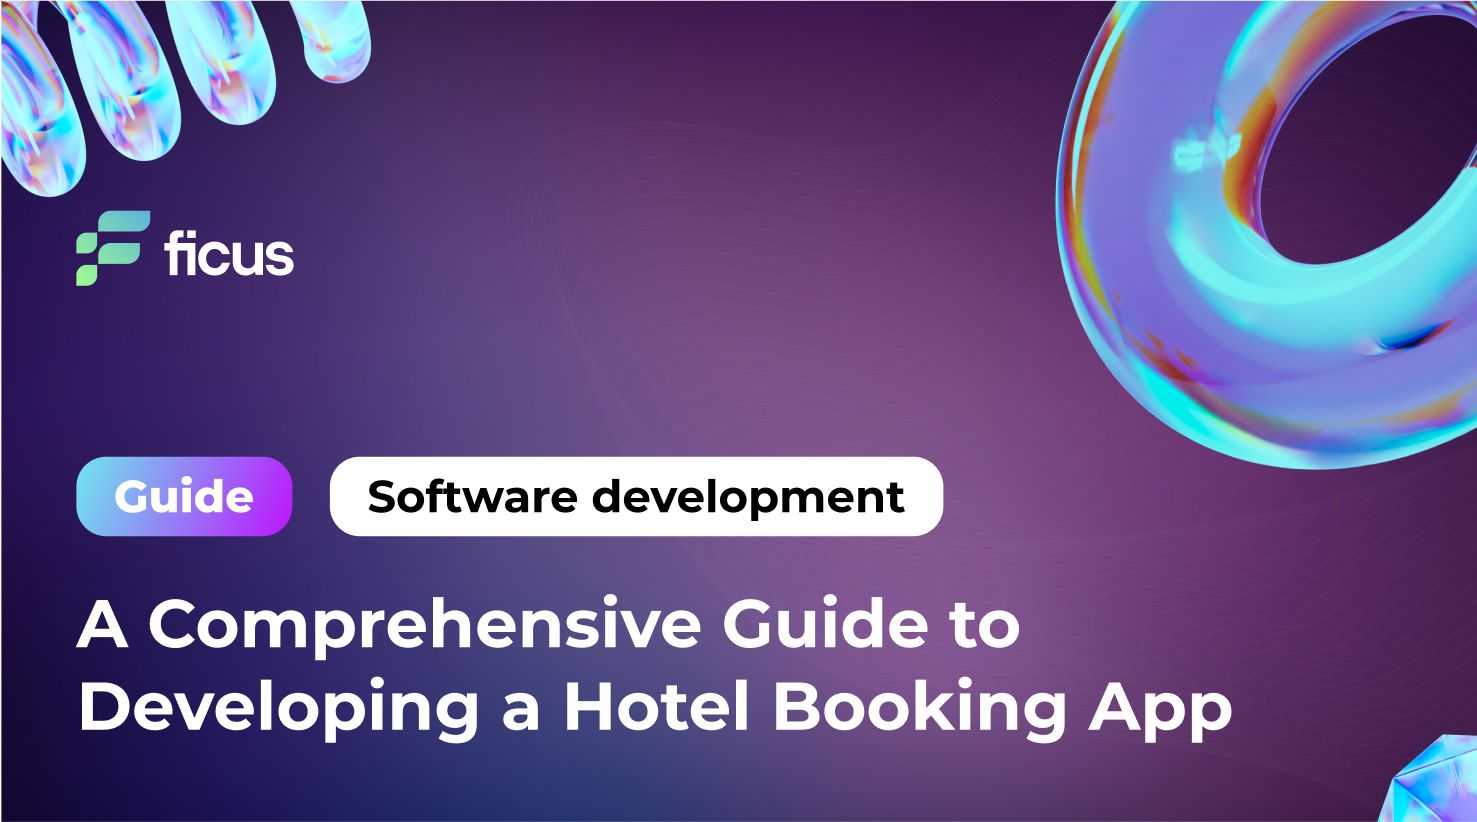 A Comprehensive Guide to Developing a Hotel Booking App